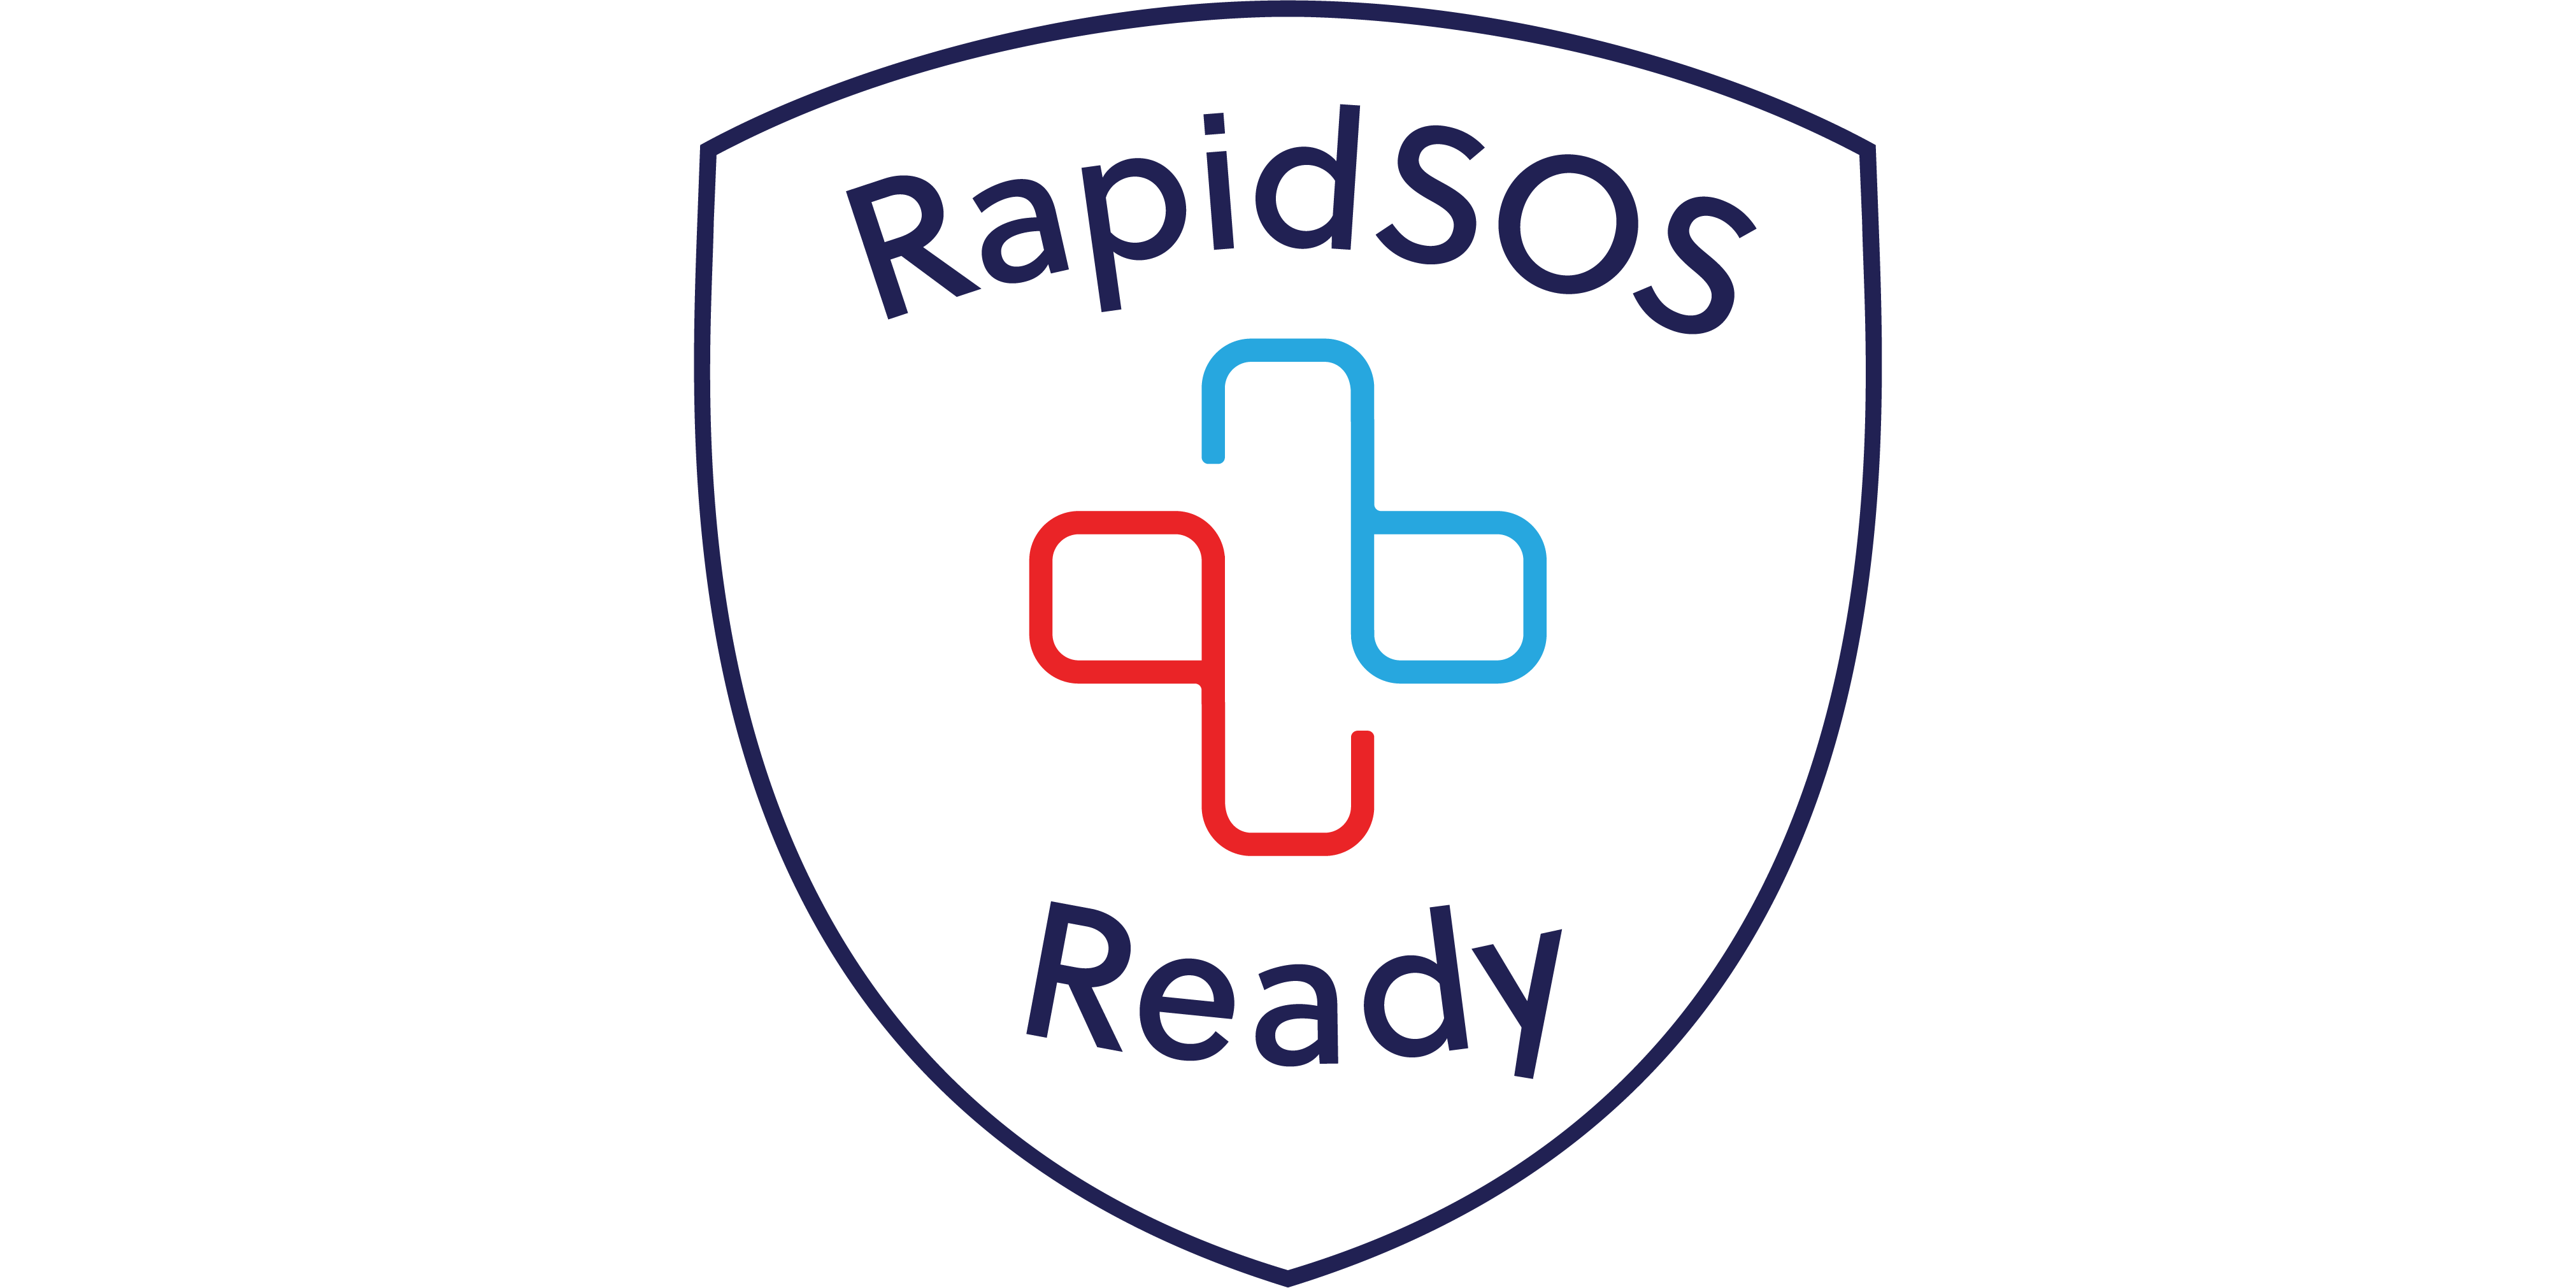 Local Security Partners with RapidSOS to Send Multimedia Incident Data to 911